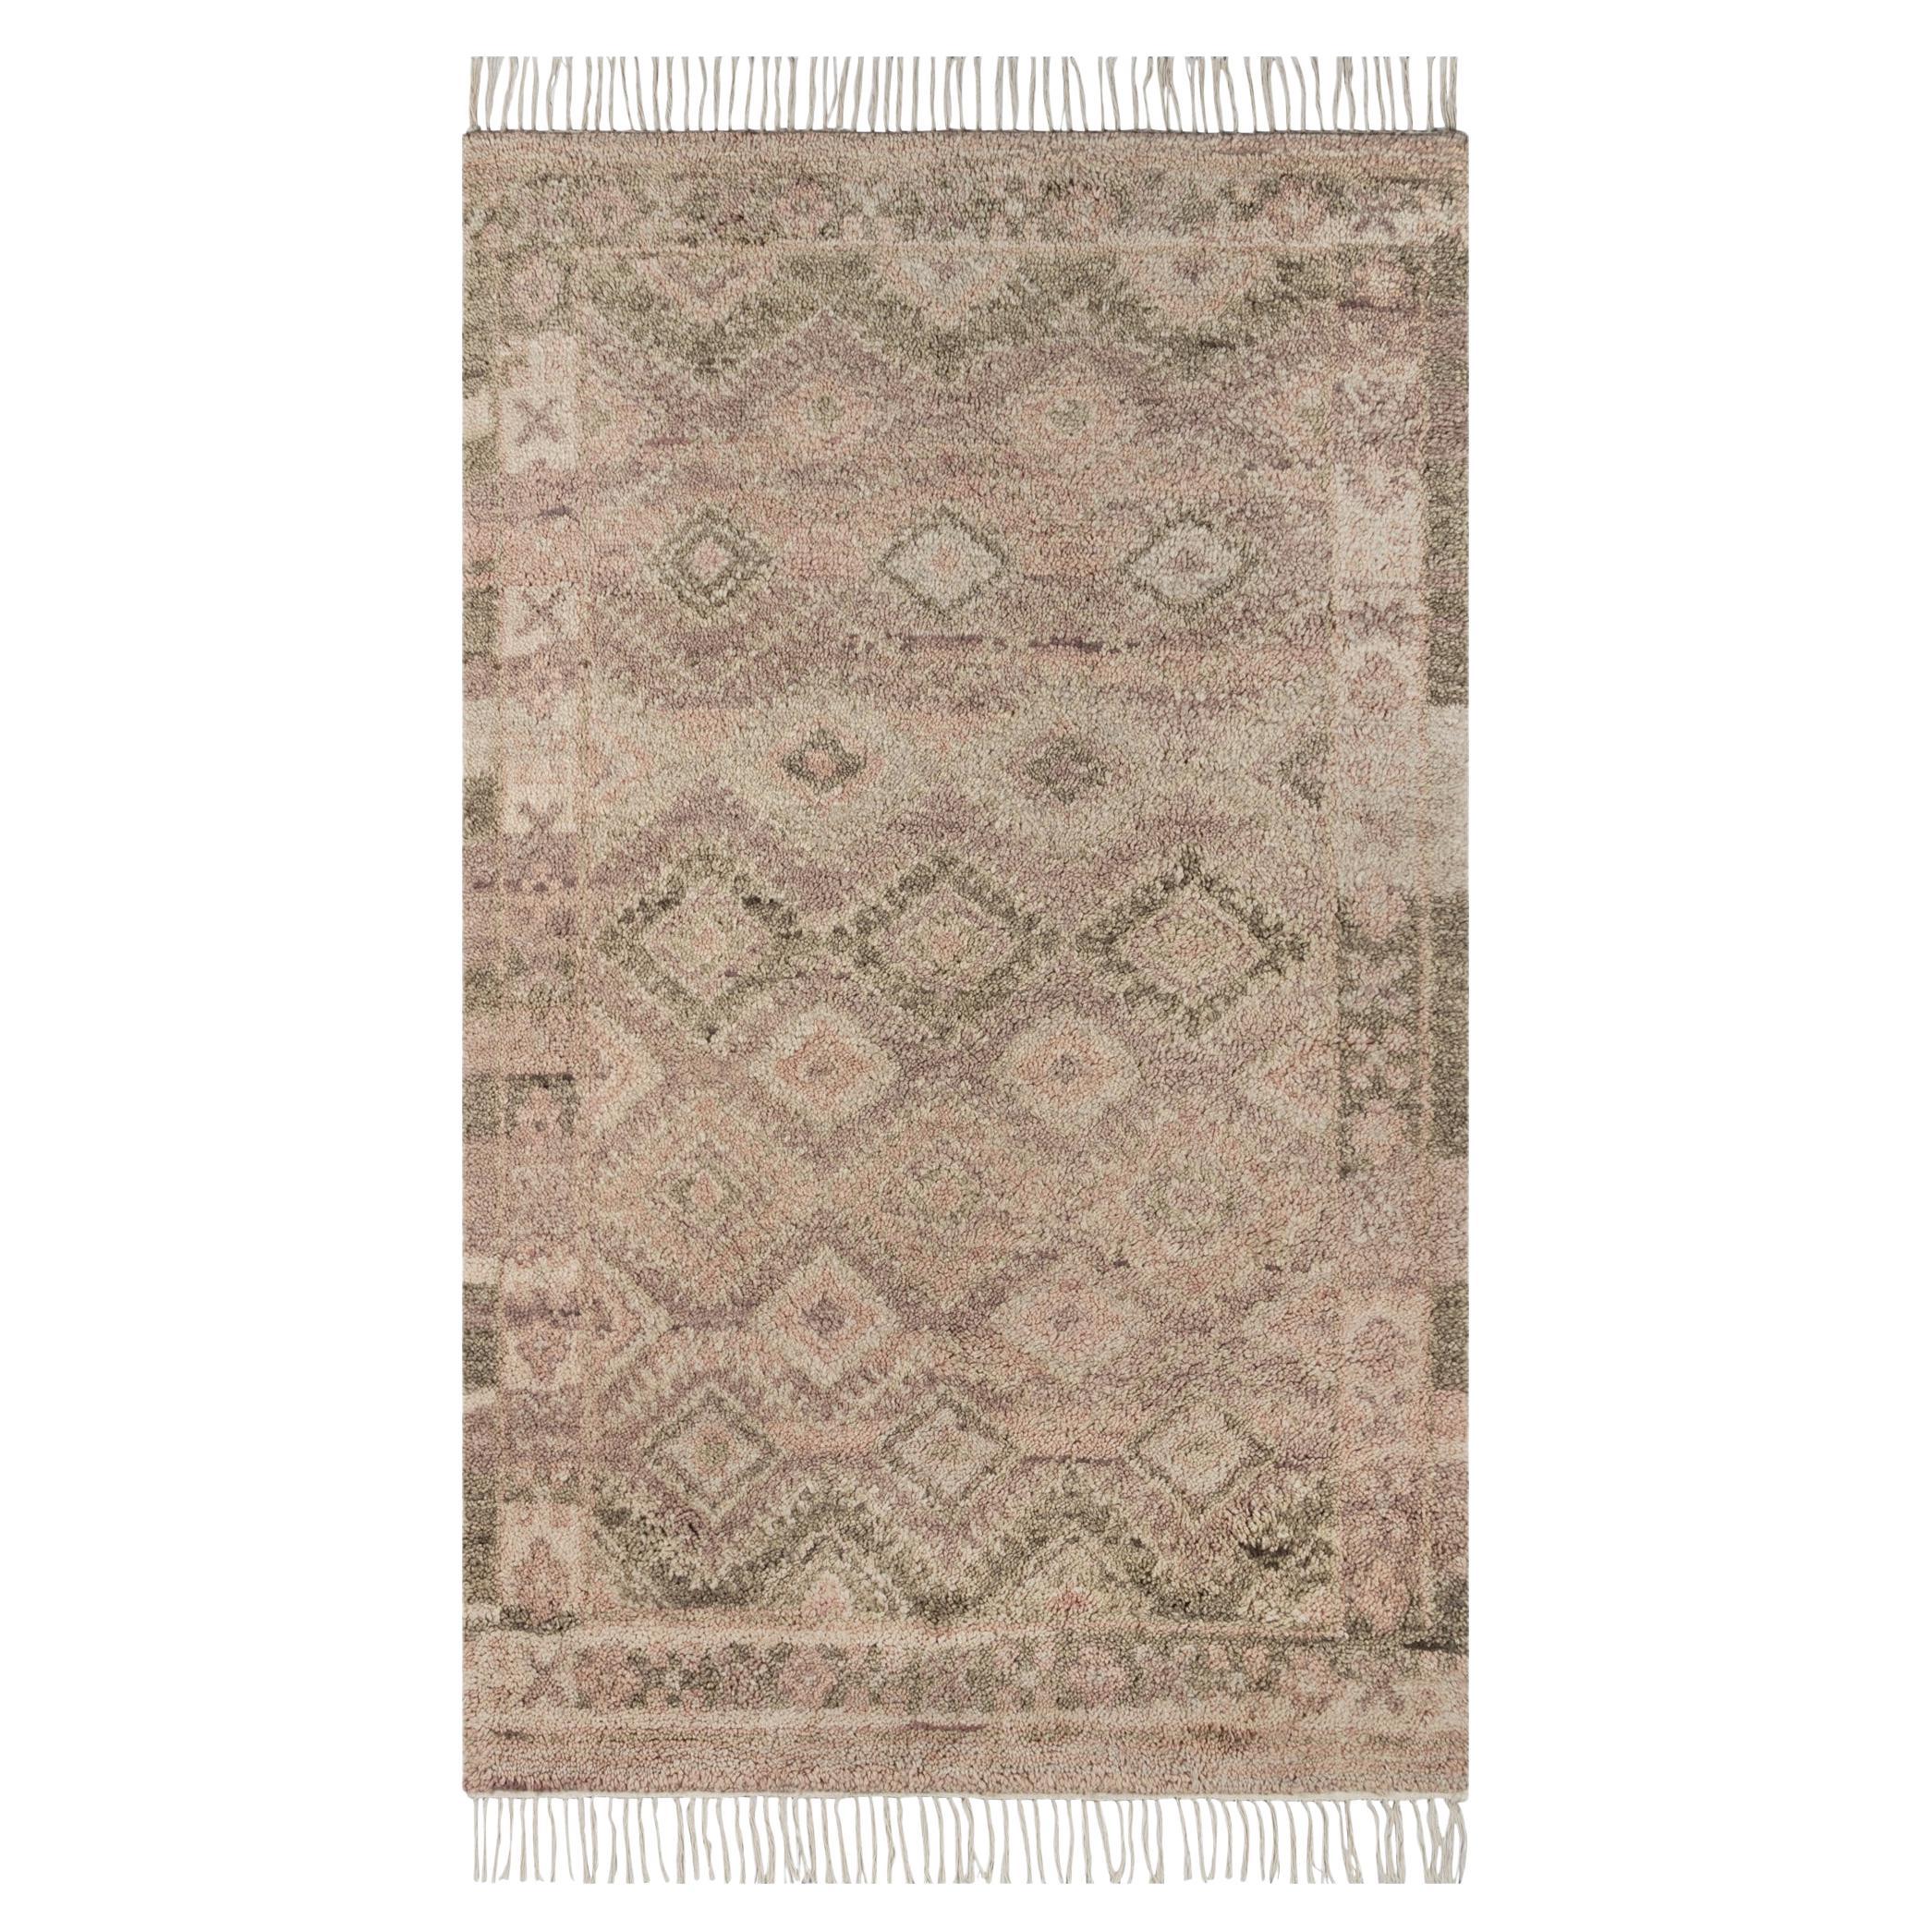 “Doukkala Galoya” Moroccan-Inspired Rug 'Natural' by Christiane Lemieux For Sale